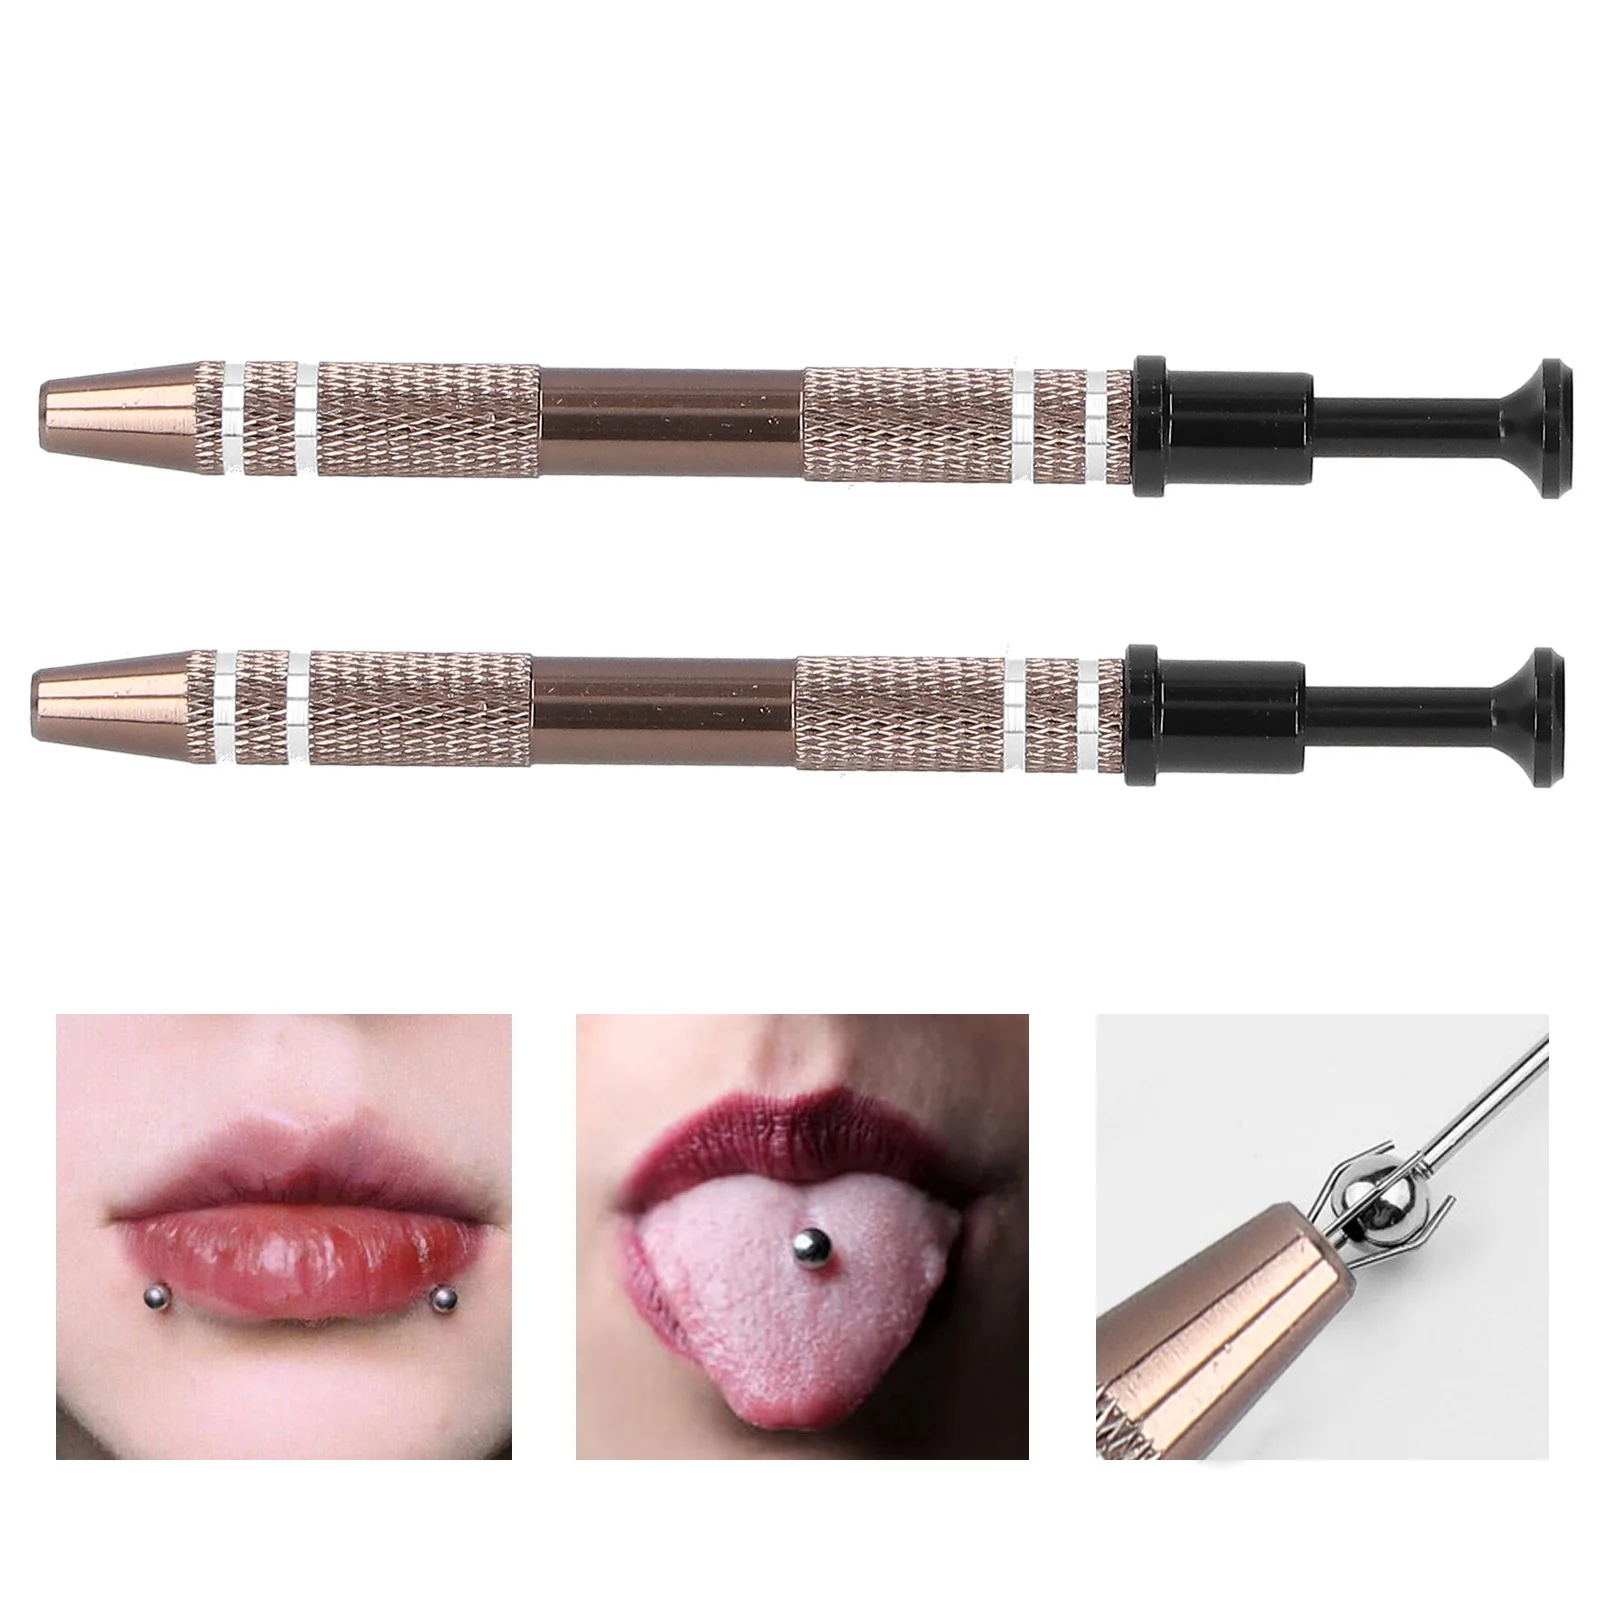 2Pcs Microblading Alloy High Precision 4 Prongs Bead Holder Jewelry Bead Grasping Pick Up Tool Body Tattoo Piercing Accessories 2pcs lot gh361b gem pearl diamond stone holder pick up tool bead tweezer goldsmith tools jewelry pick up tools